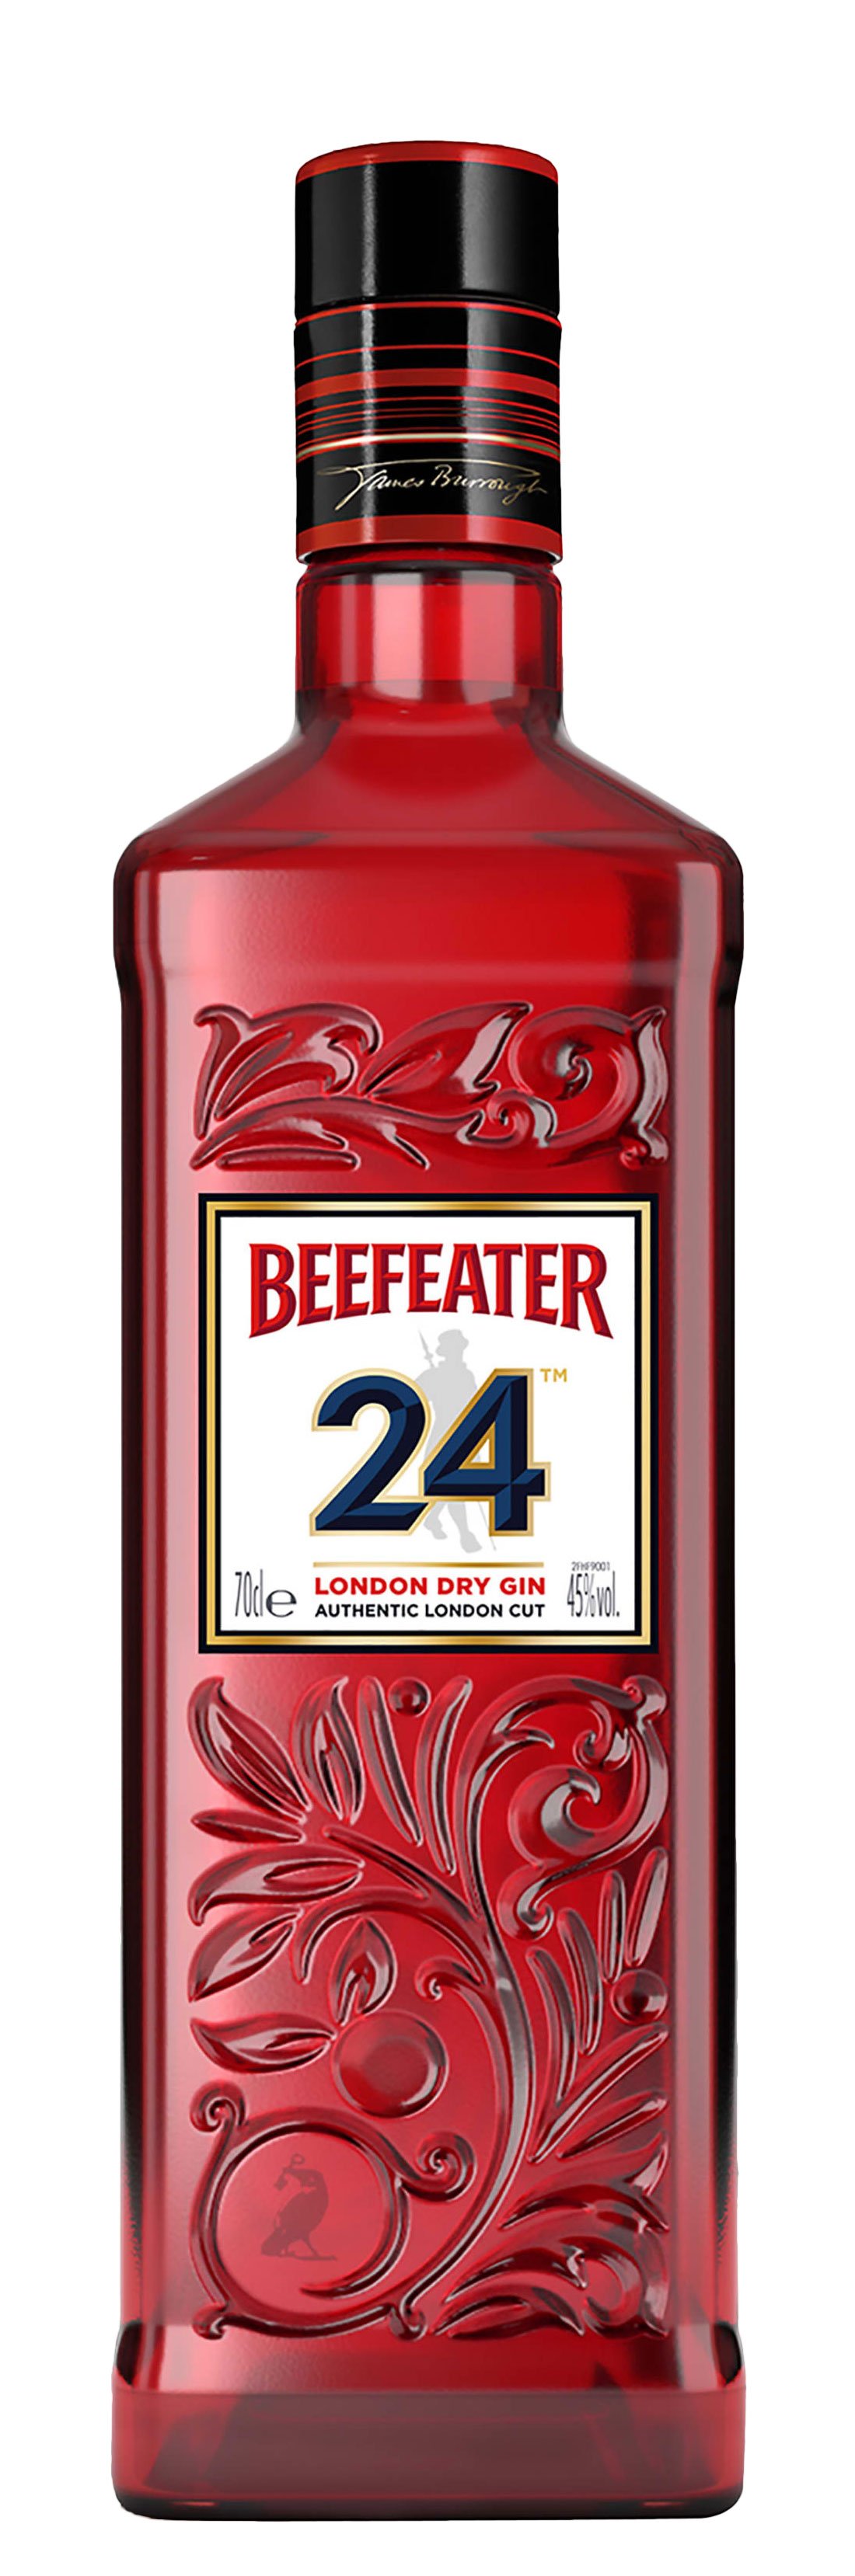 Beefeater London Dry Gin 24 Option 1